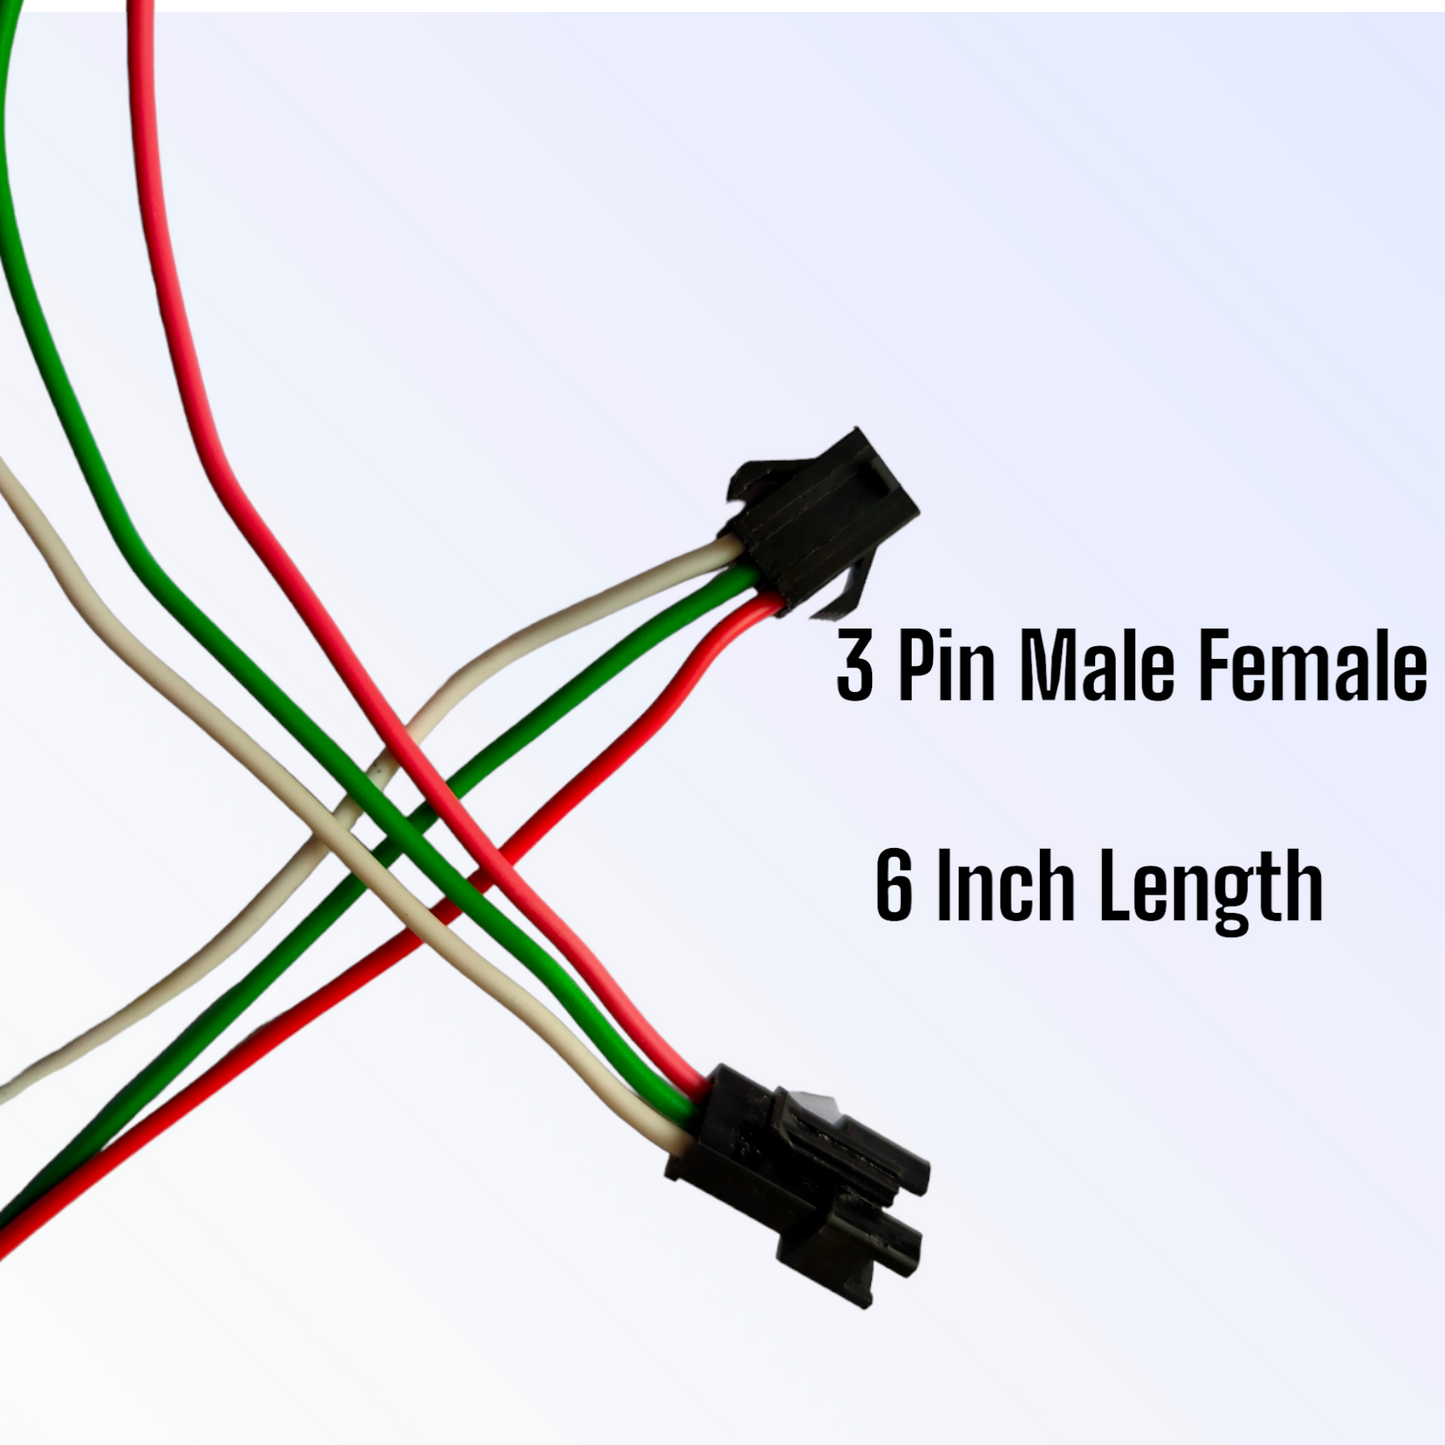 3 Pin Male Female Connector